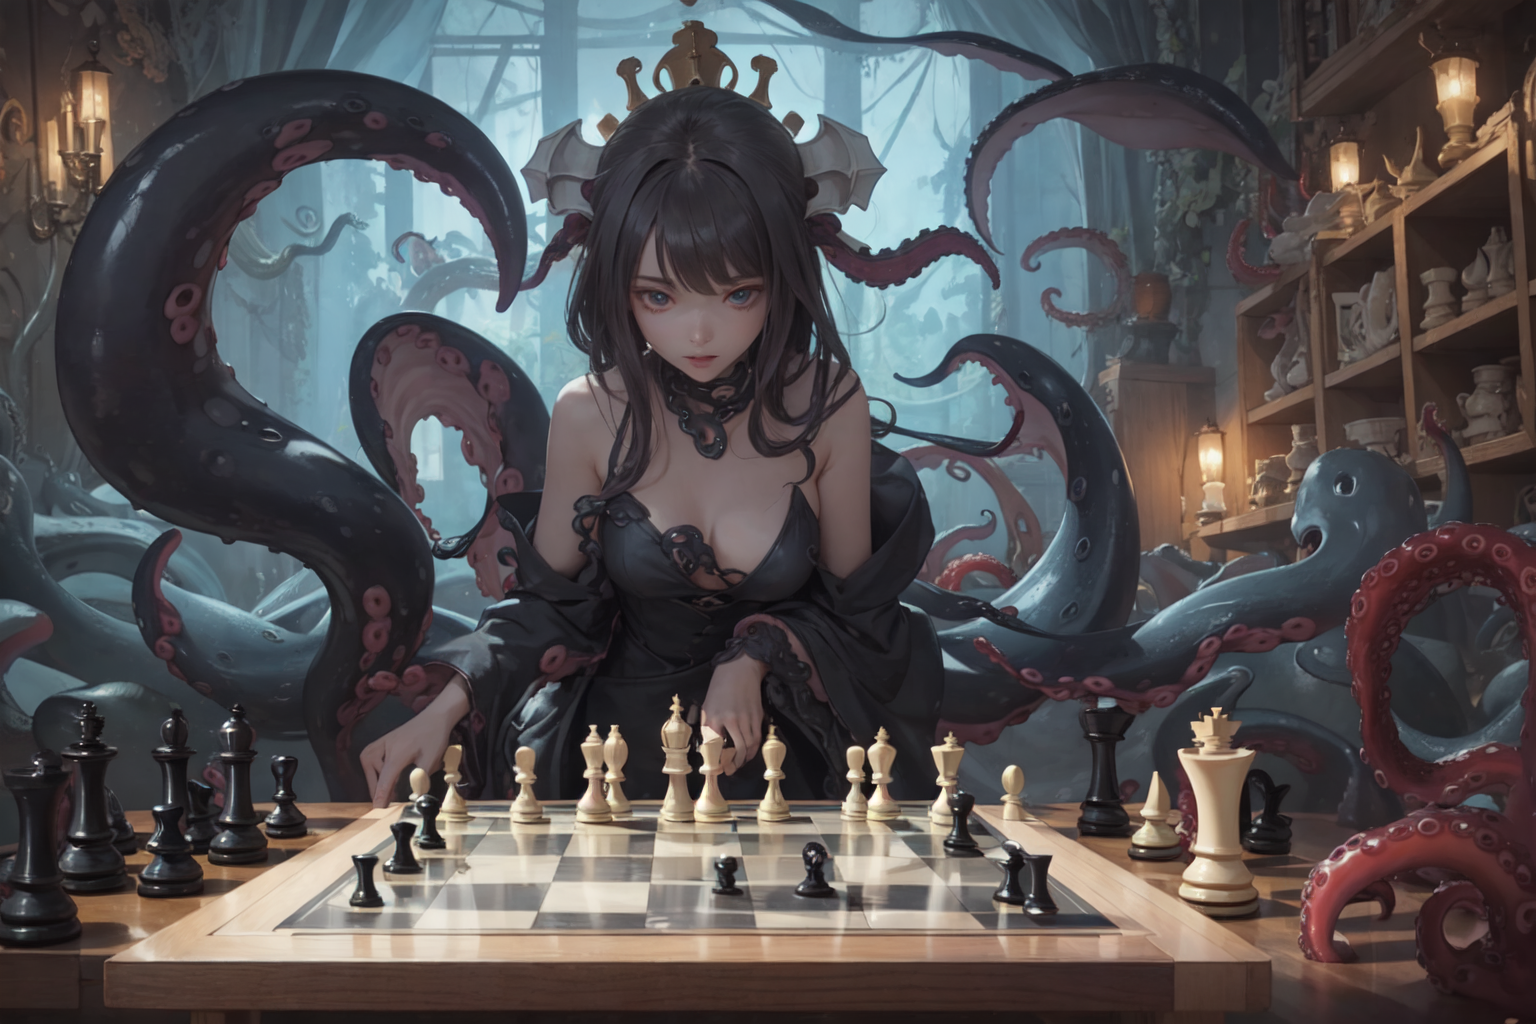 My Best Wallpaper Collection (Chess, Girls, Anime, Other) - Chess